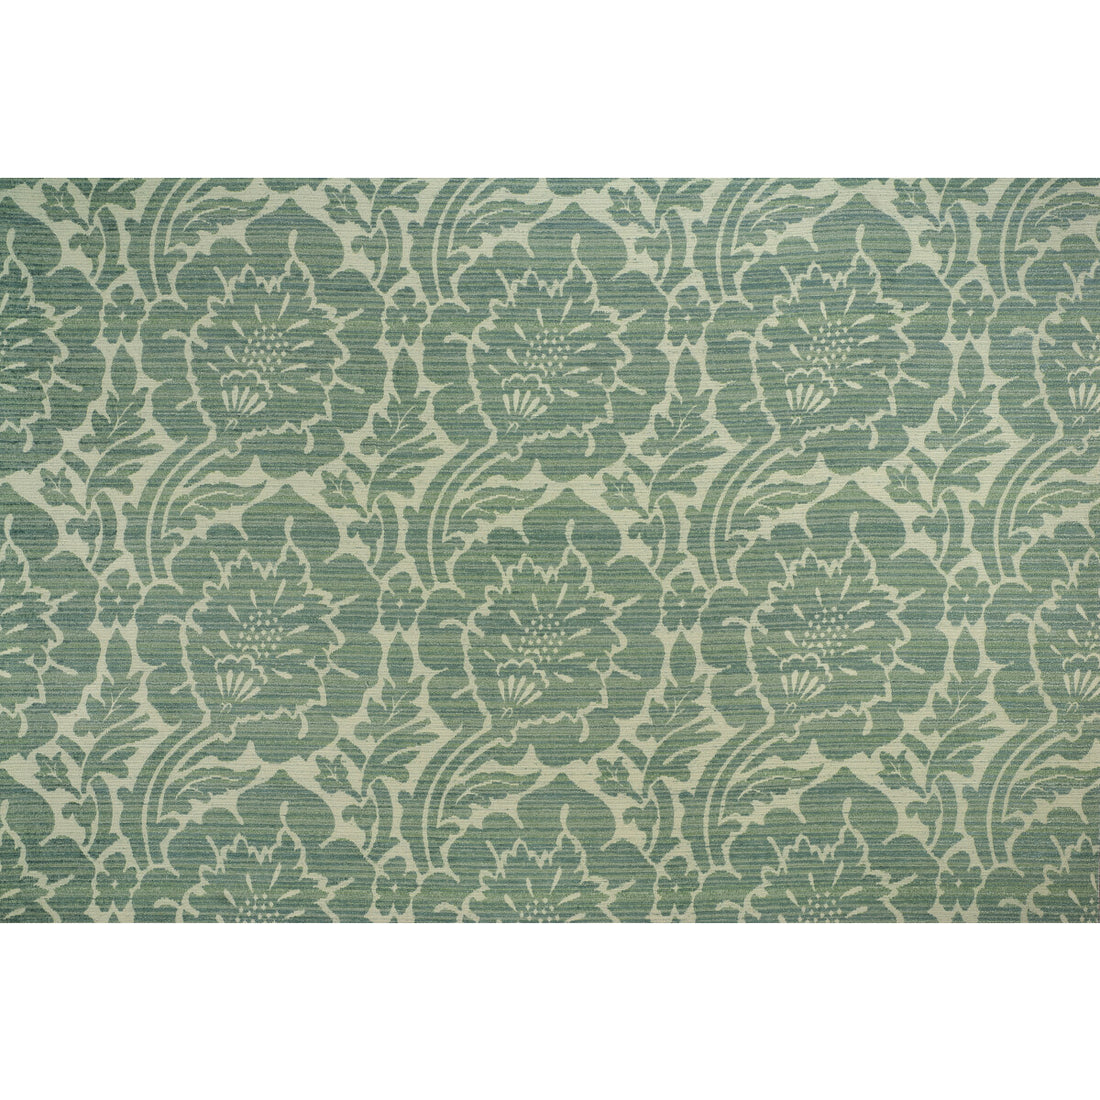 Kravet Contract fabric in 34772-13 color - pattern 34772.13.0 - by Kravet Contract in the Crypton Incase collection